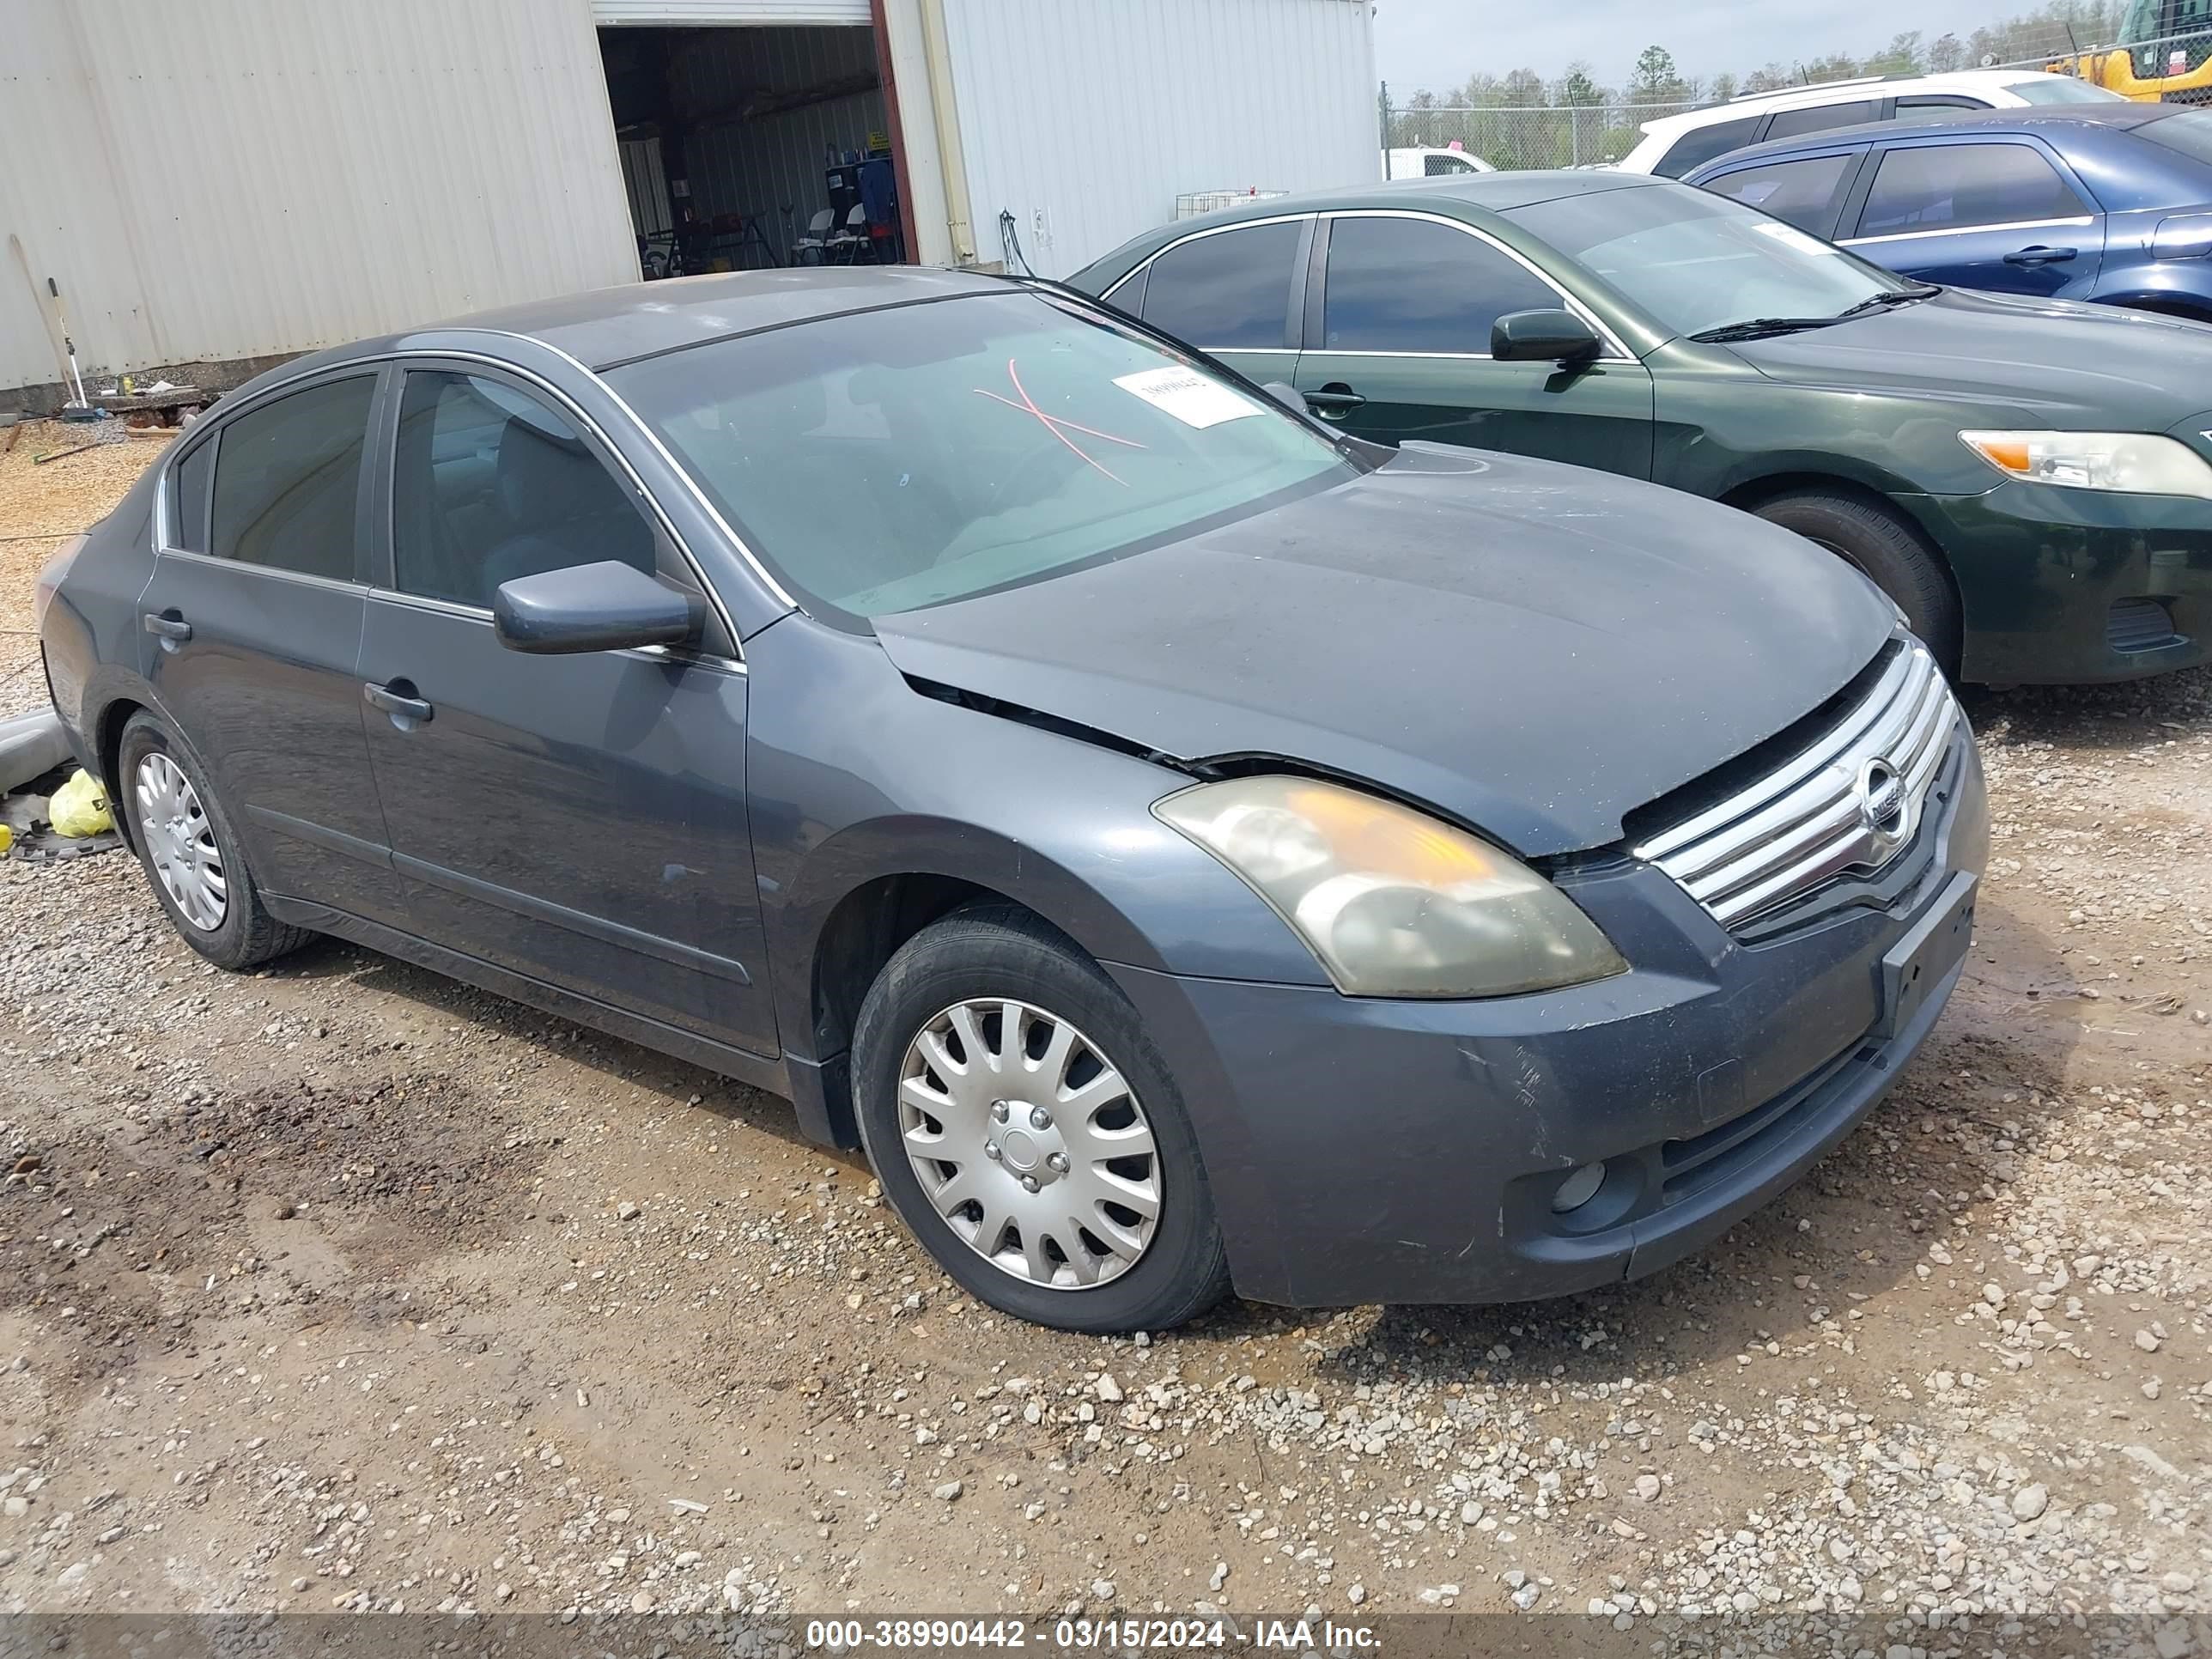 vin: 1N4AL21E99N546531 1N4AL21E99N546531 2009 nissan altima 2500 for Sale in 39562, 8209 Old Stage Rd, Moss Point, Mississippi, USA